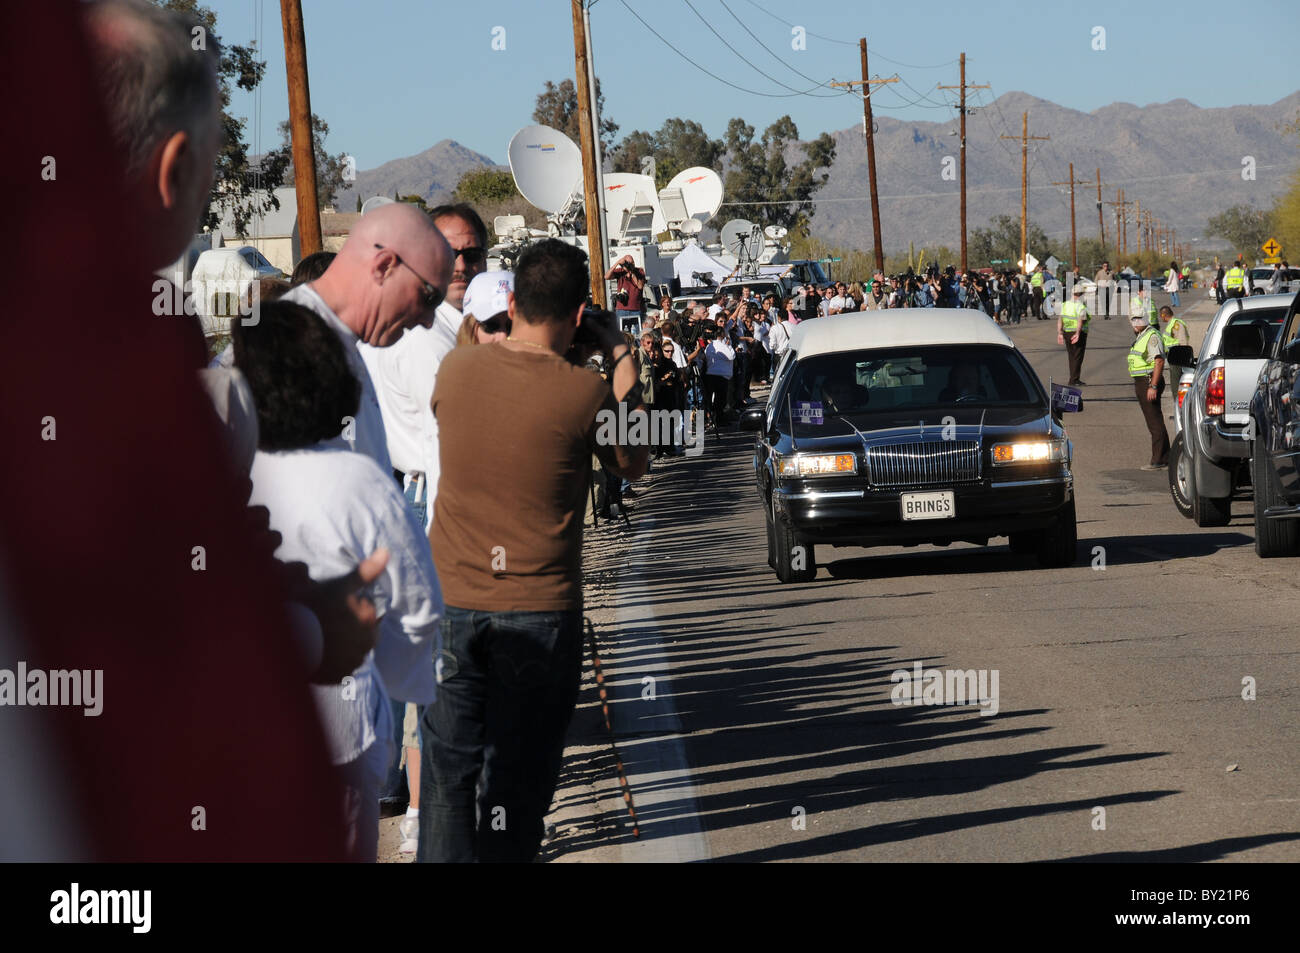 The funeral of Christina Taylor Green, 8, who was shot and killed during an assassination attempt of Congresswoman Gabrielle Giffords in Tucson, Arizona, USA.  Green was born on September 11, 2001. Stock Photo